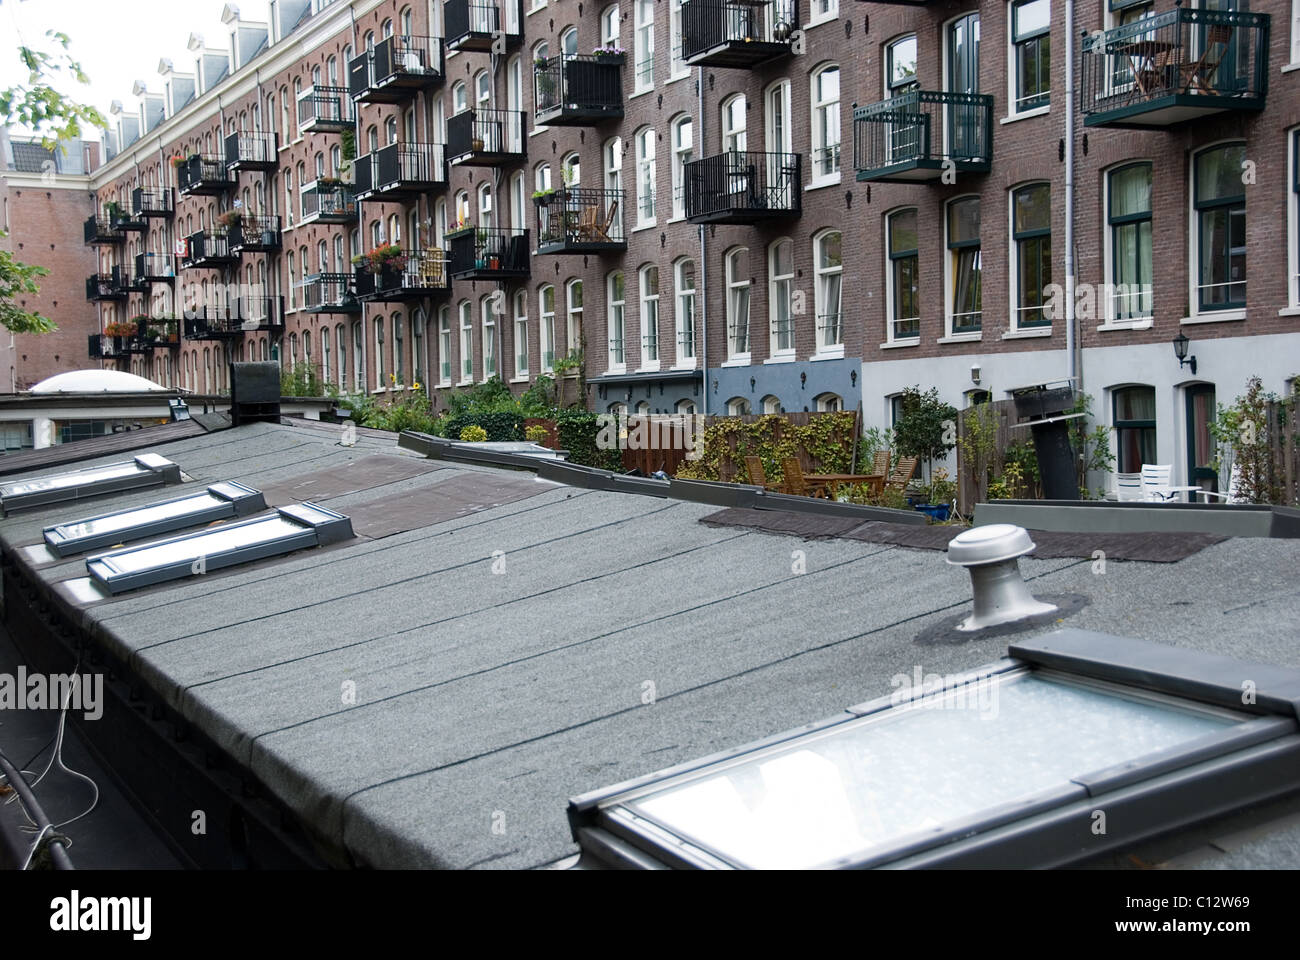 Balcony exteriors and rooftops in Amsterdam, Holland Stock Photo